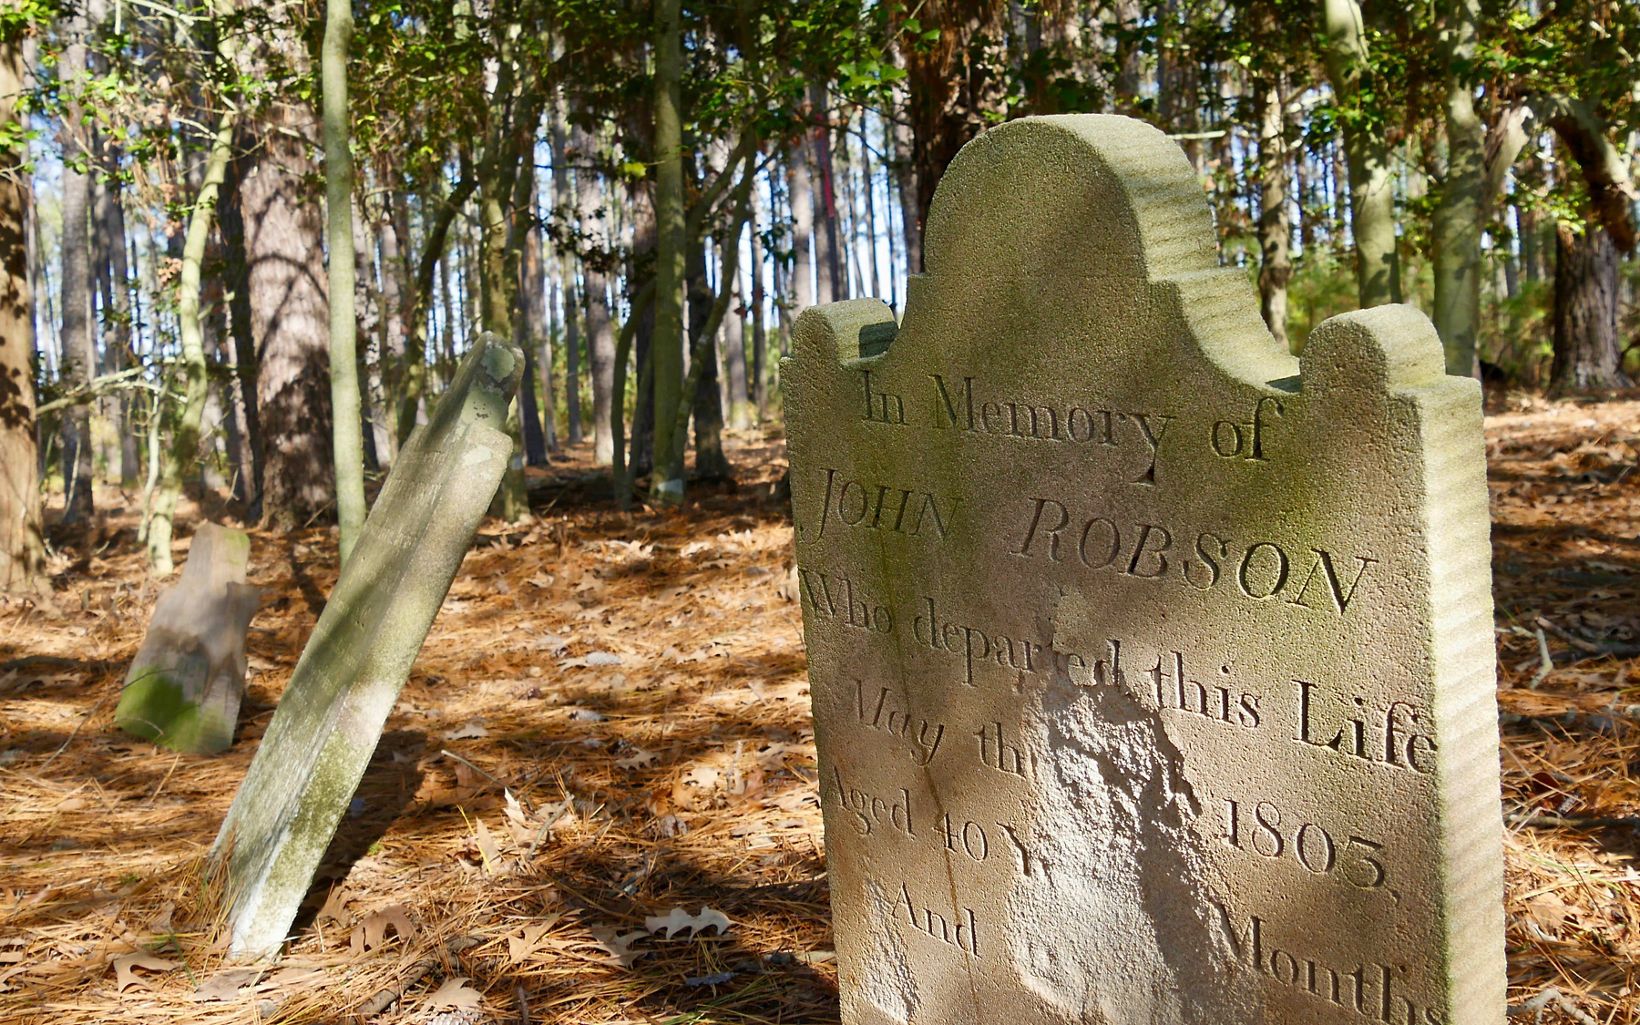 A row of headstones. The nearest marker reads, "In memory of John Robson Who departed this Life May 1805 Aged 40 years." The center of the marker has eroded away. The stone next to it is tiled back.